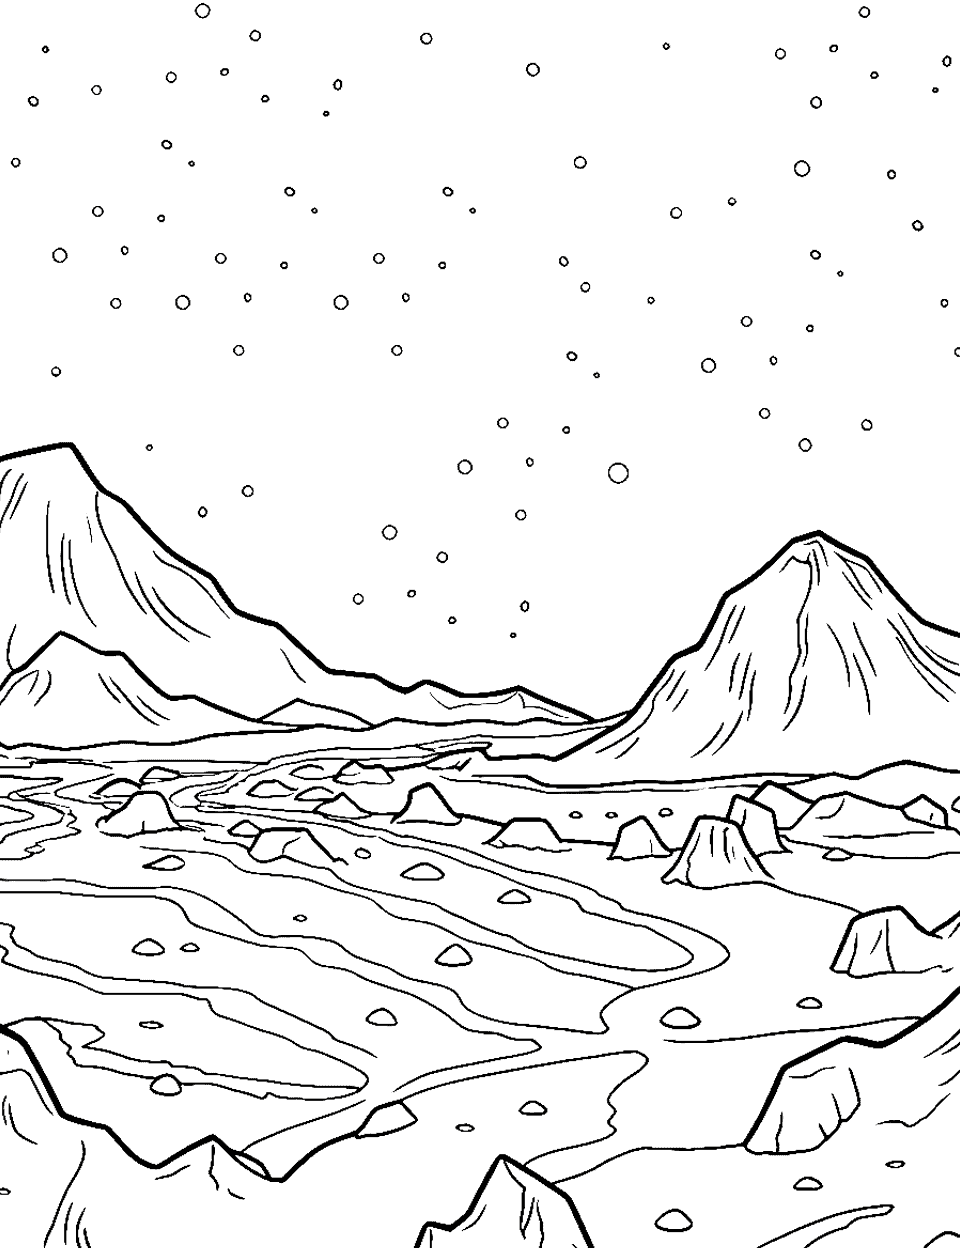 Pluto's Icy Terrain Coloring Page - The dwarf planet Pluto with icy mountains and valleys.